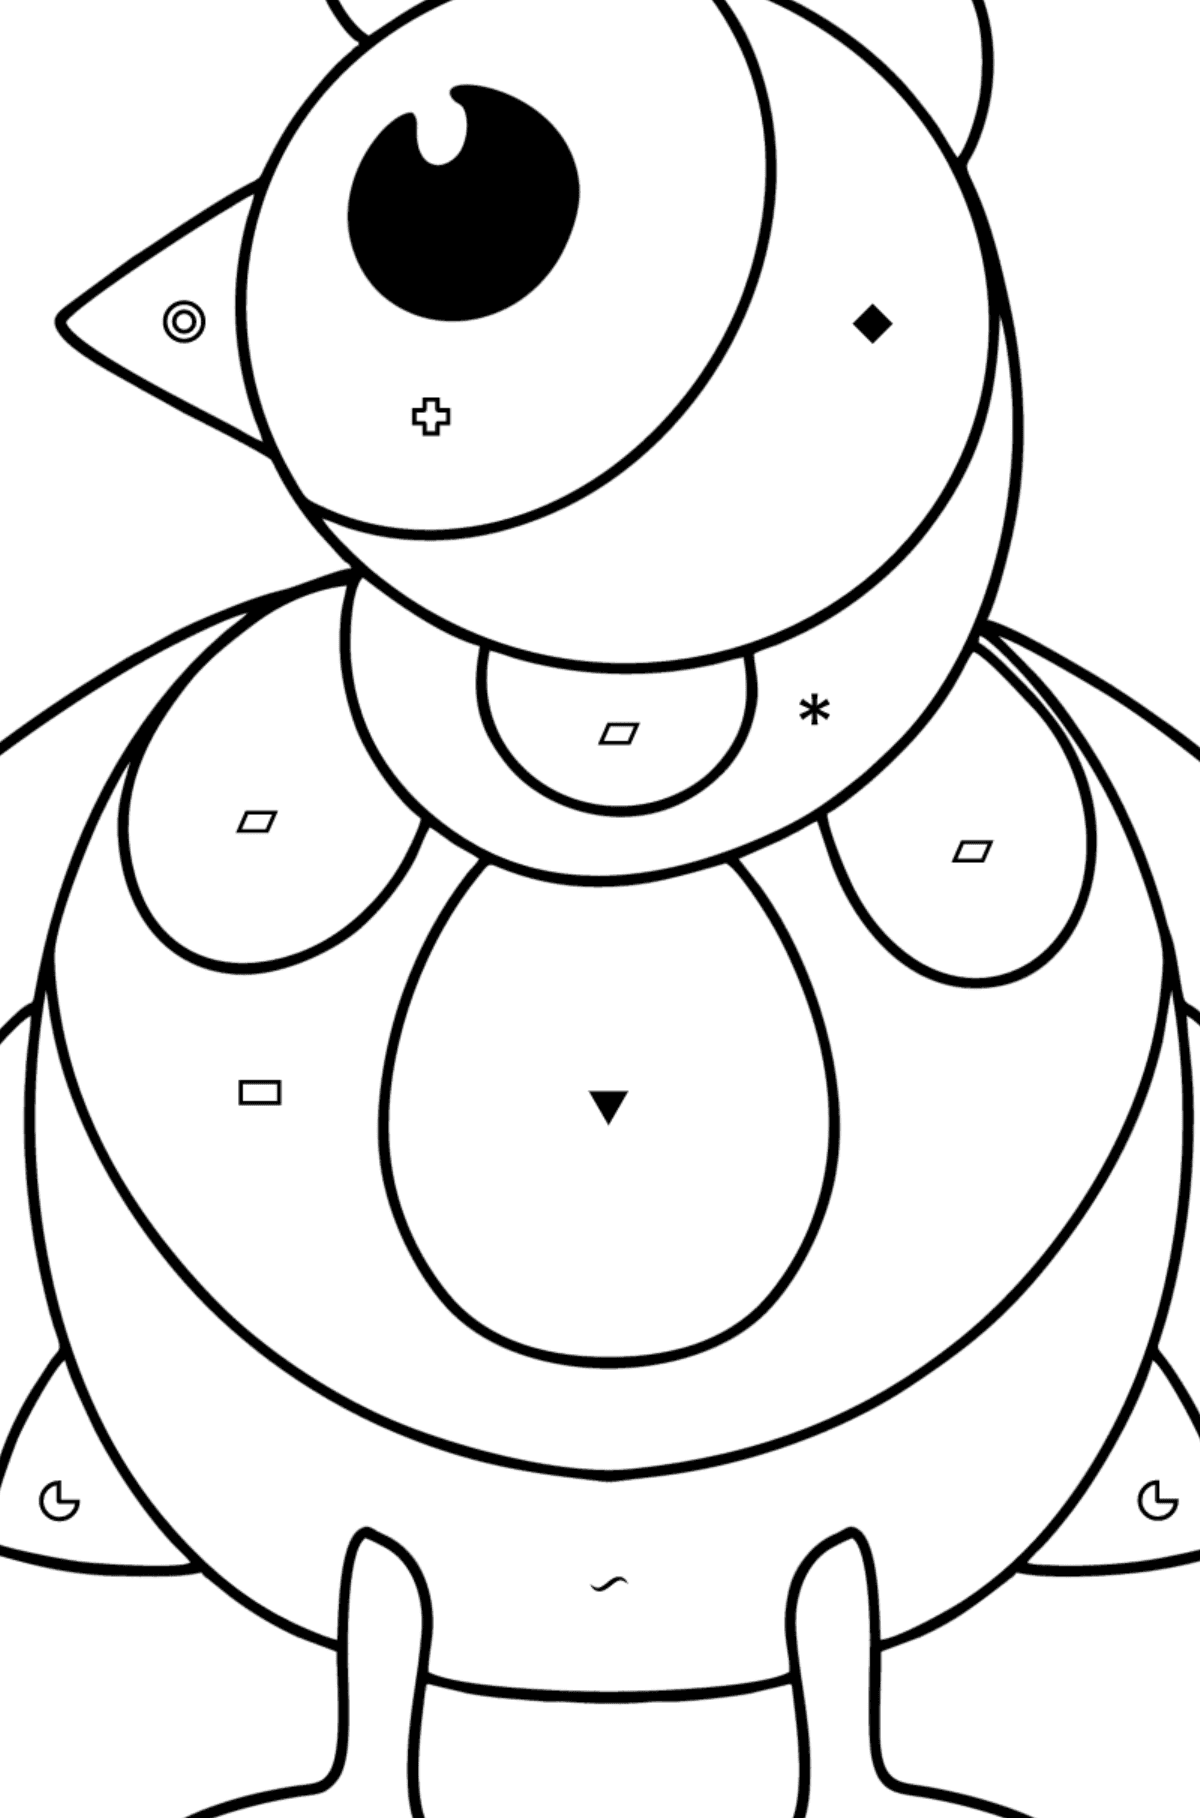 Chicken Anti stress coloring page - Coloring by Symbols and Geometric Shapes for Kids